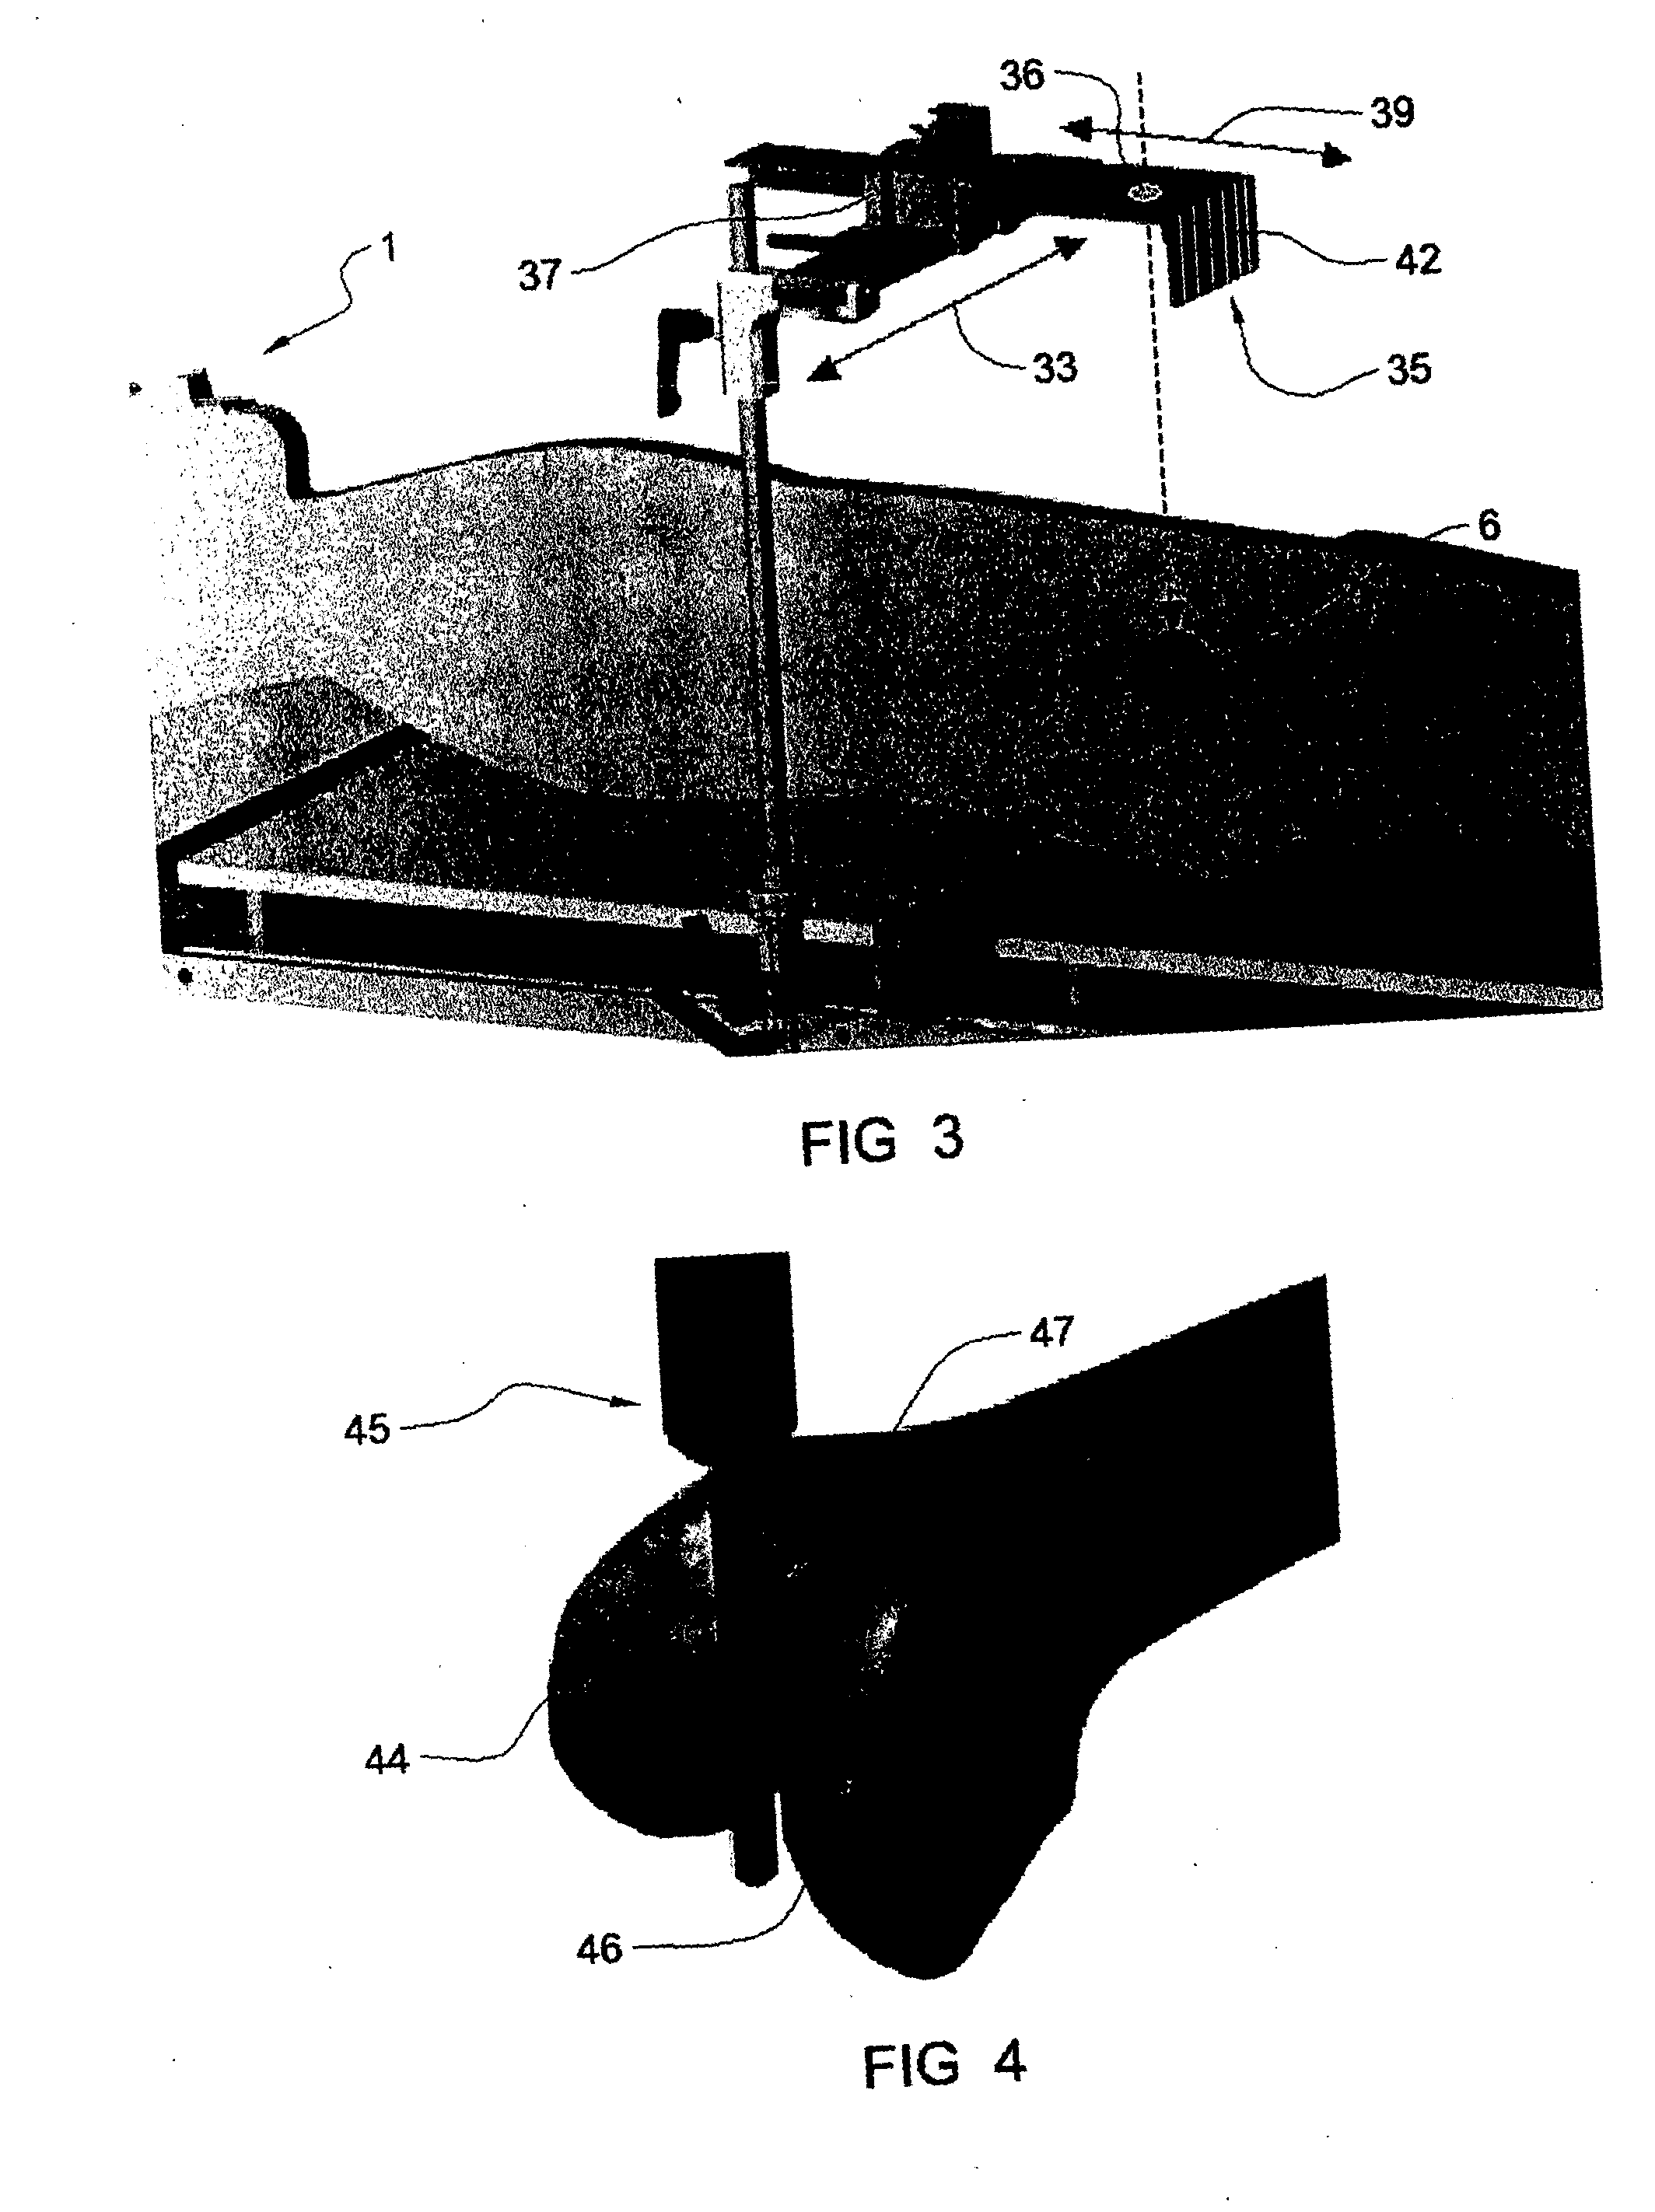 Laser triangulation of the femoral head for total knee arthroplasty alignment instruments and surgical method